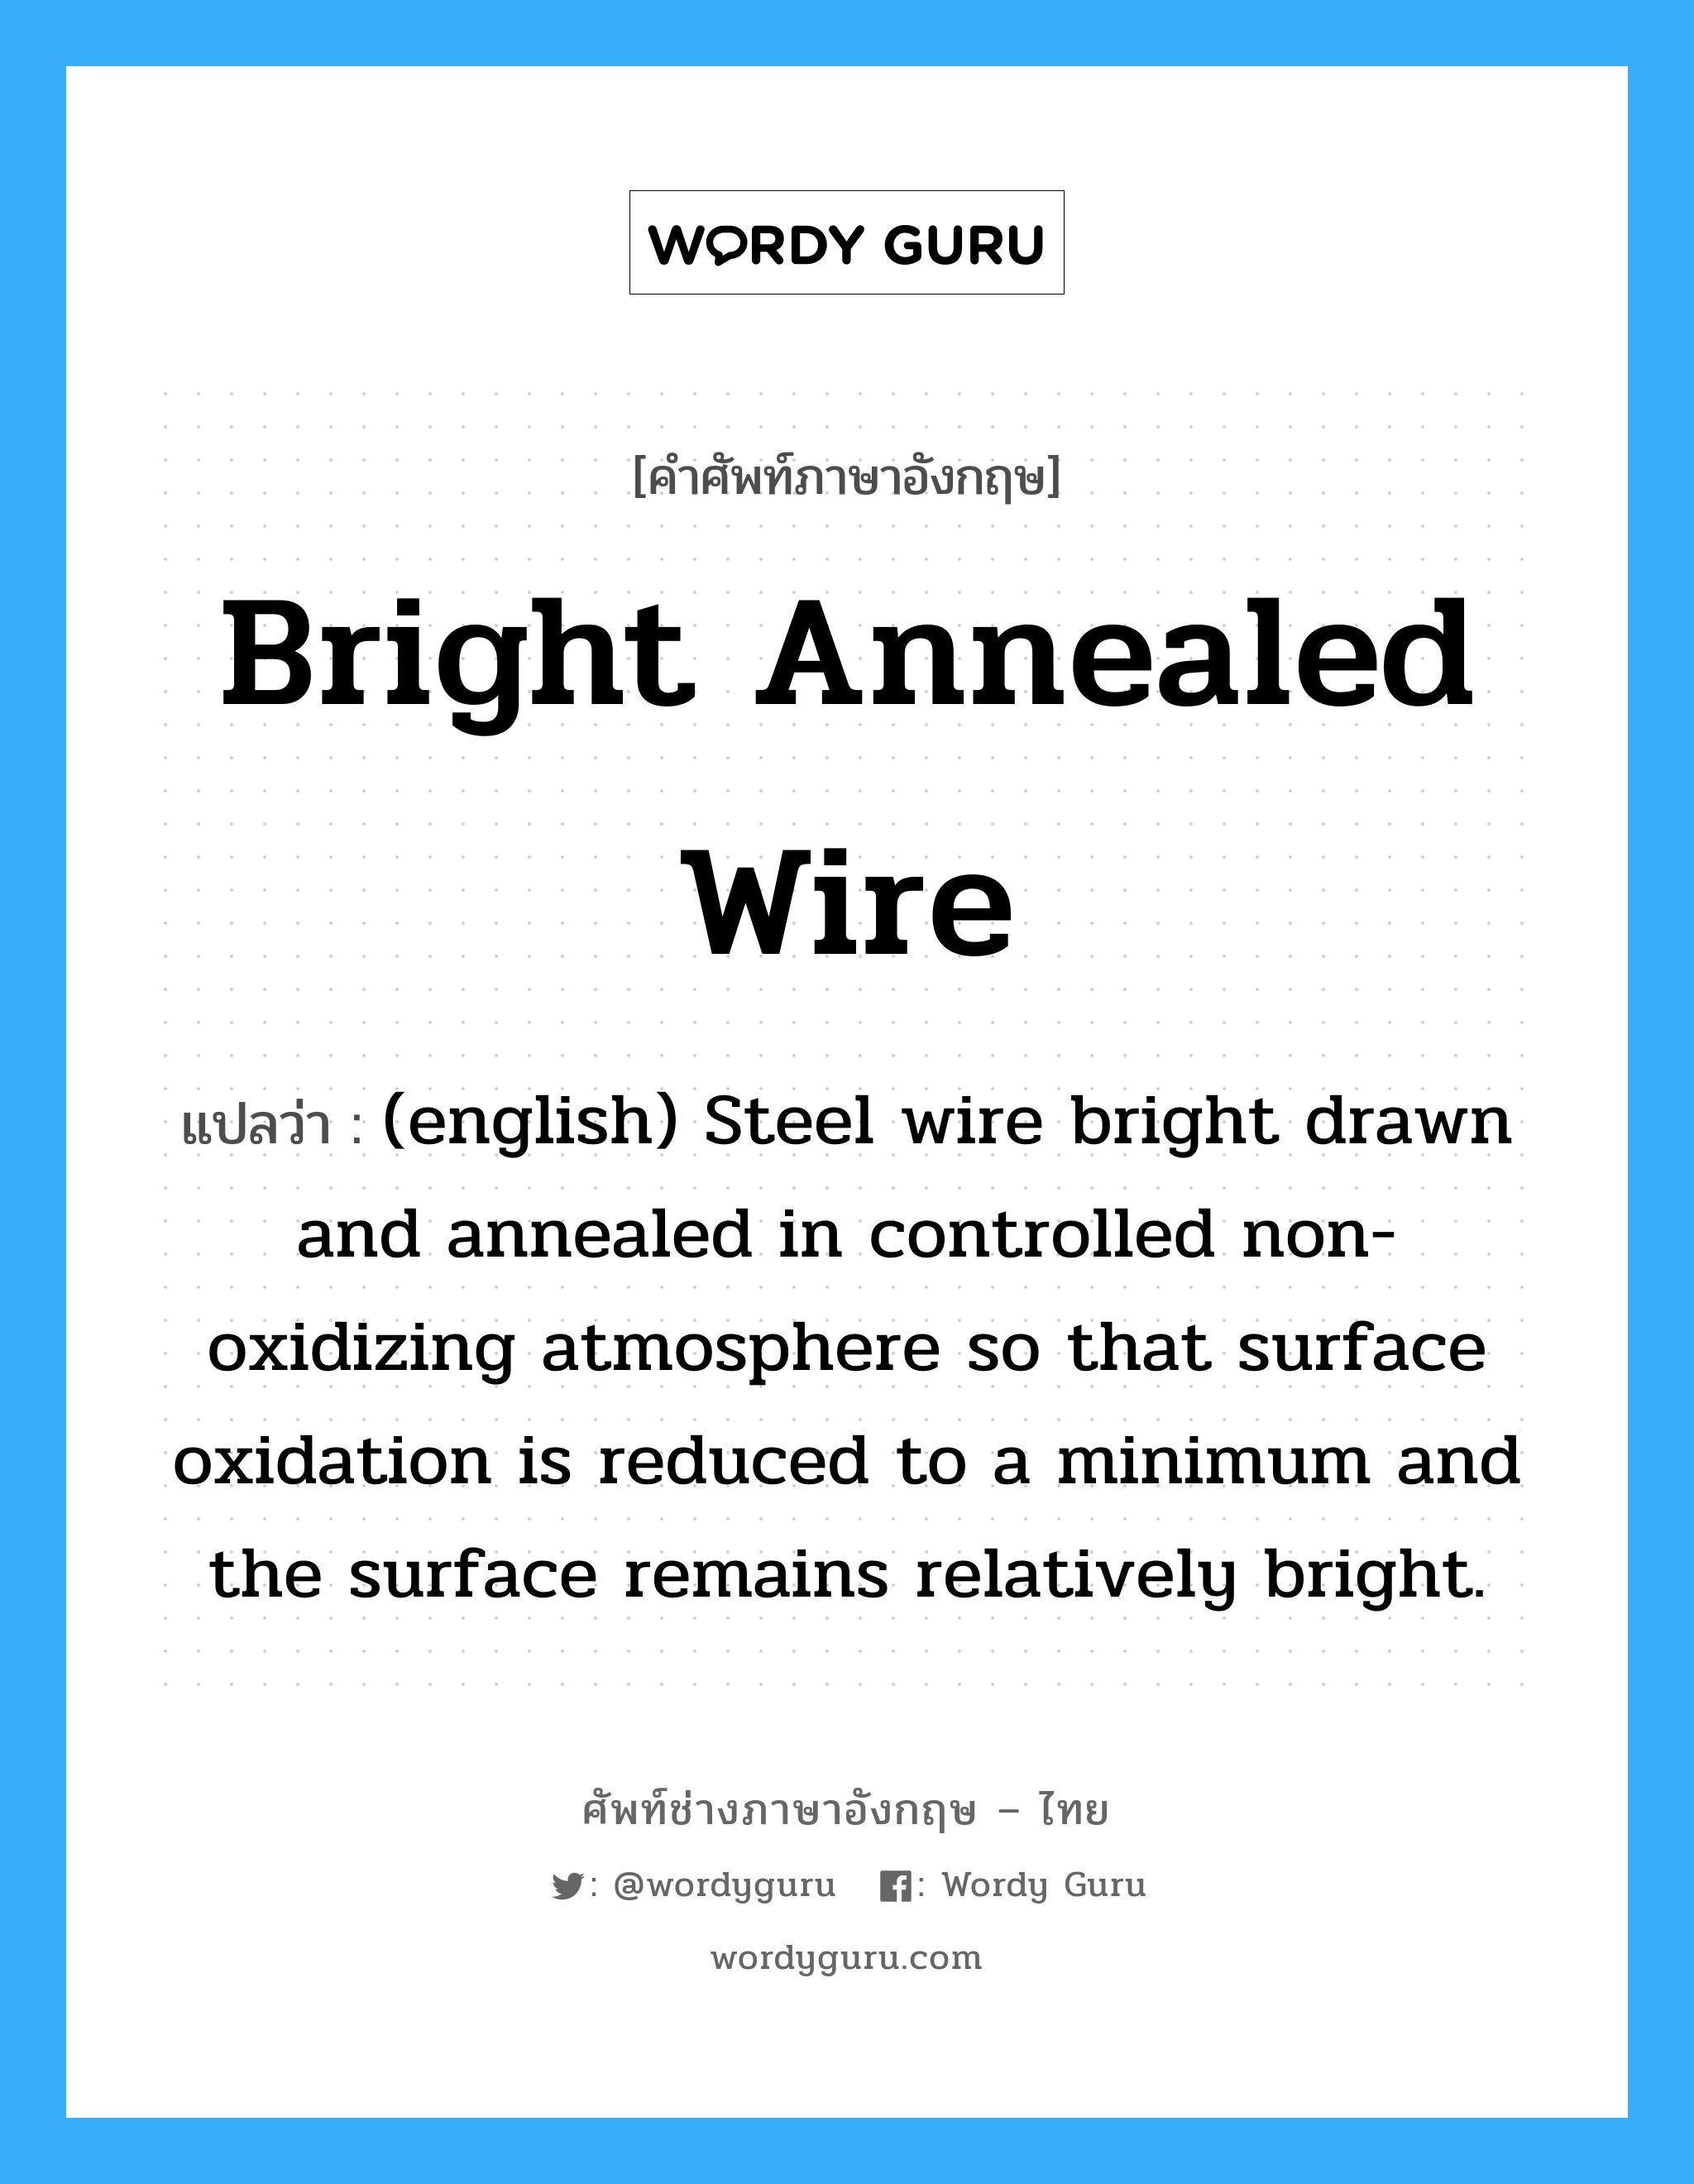 Bright Annealed Wire แปลว่า?, คำศัพท์ช่างภาษาอังกฤษ - ไทย Bright Annealed Wire คำศัพท์ภาษาอังกฤษ Bright Annealed Wire แปลว่า (english) Steel wire bright drawn and annealed in controlled non-oxidizing atmosphere so that surface oxidation is reduced to a minimum and the surface remains relatively bright.